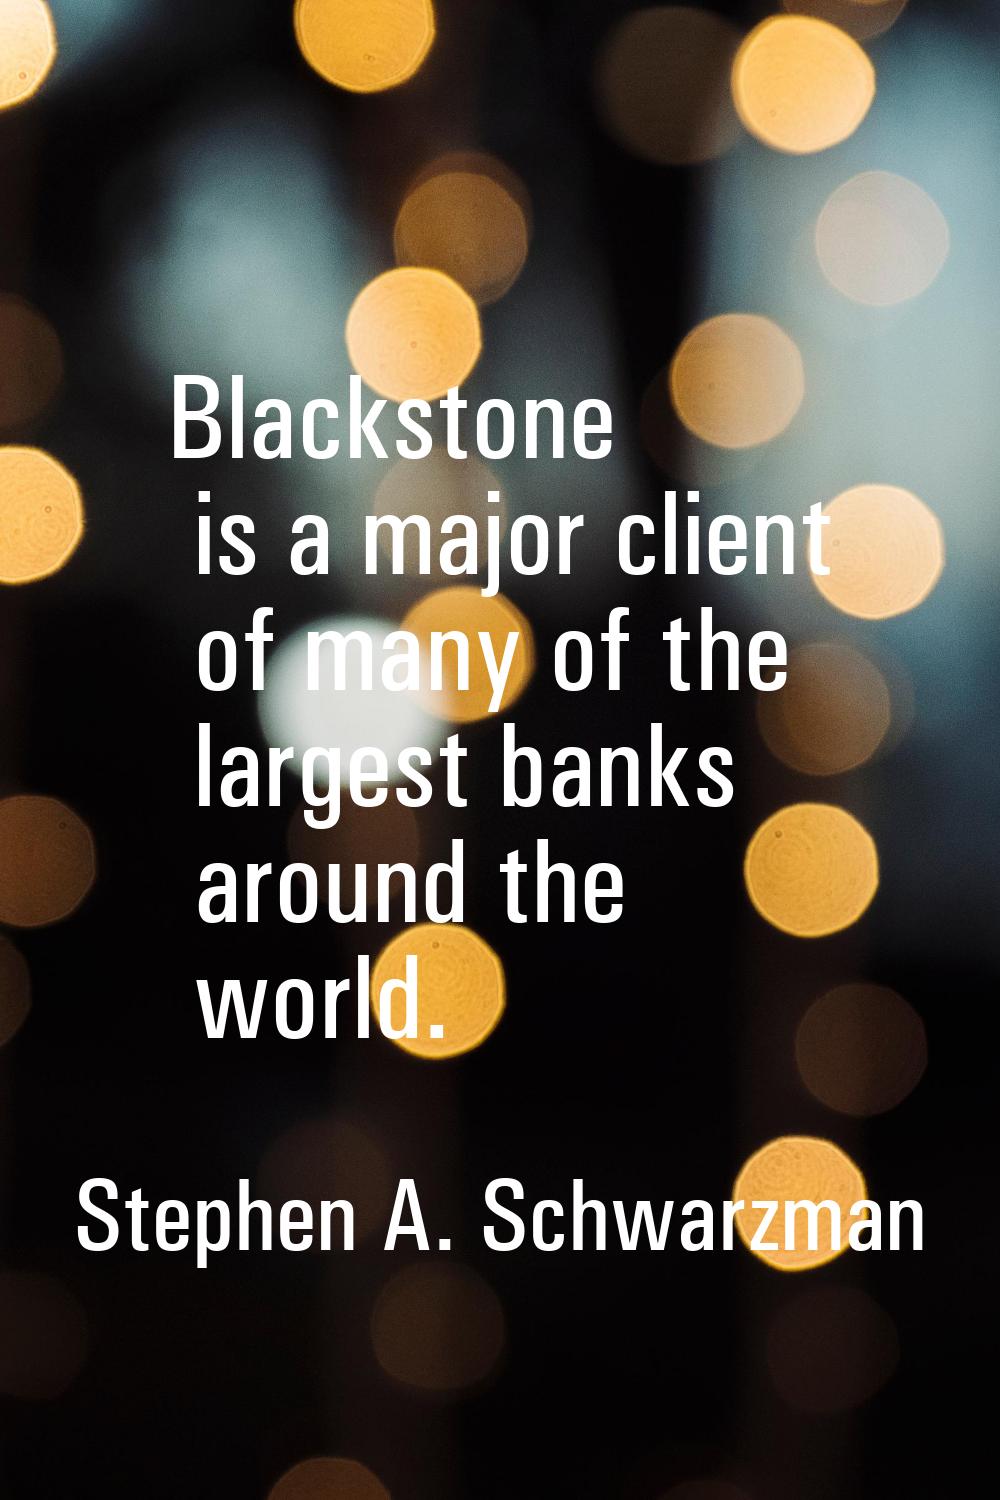 Blackstone is a major client of many of the largest banks around the world.